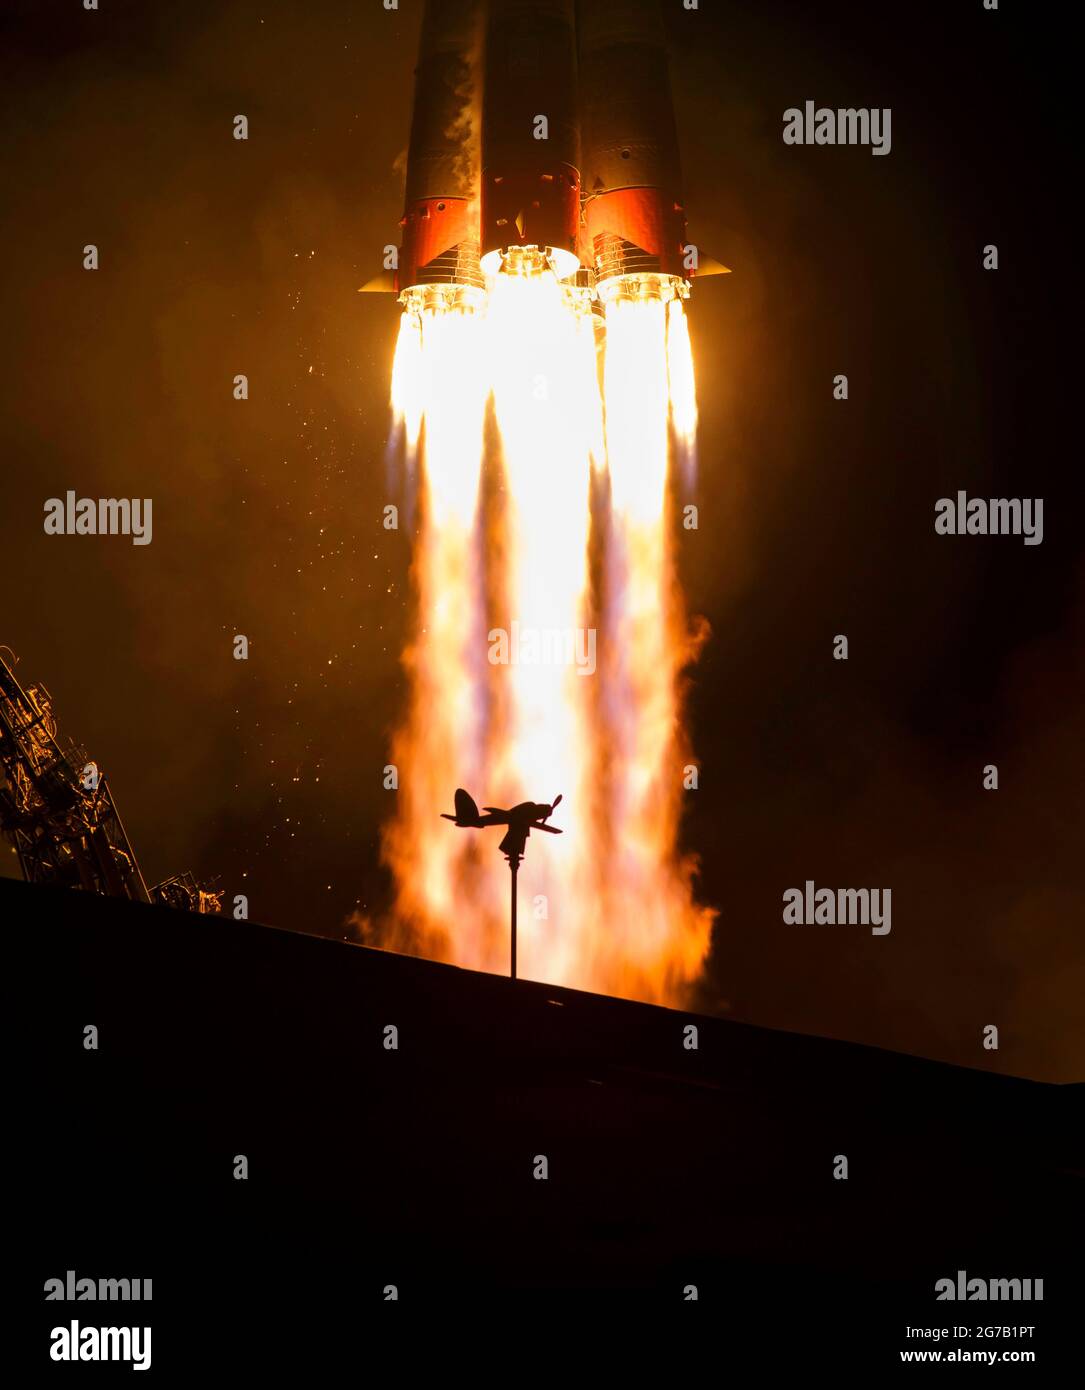 The Soyuz MS-12 spacecraft is launched with Expedition 59 crewmembers Nick Hague and Christina Koch of NASA, along with Alexey Ovchinin of Roscosmos, 15 March 2019, at the Baikonur Cosmodrome in Kazakhstan. Hague, Koch, and Ovchinin will spend six-and-a-half months living and working aboard the International Space Station.  A unique, optimised and digitally enhanced version of an NASA image by senior NASA photographer Bill Ingalis / credit NASA Stock Photo